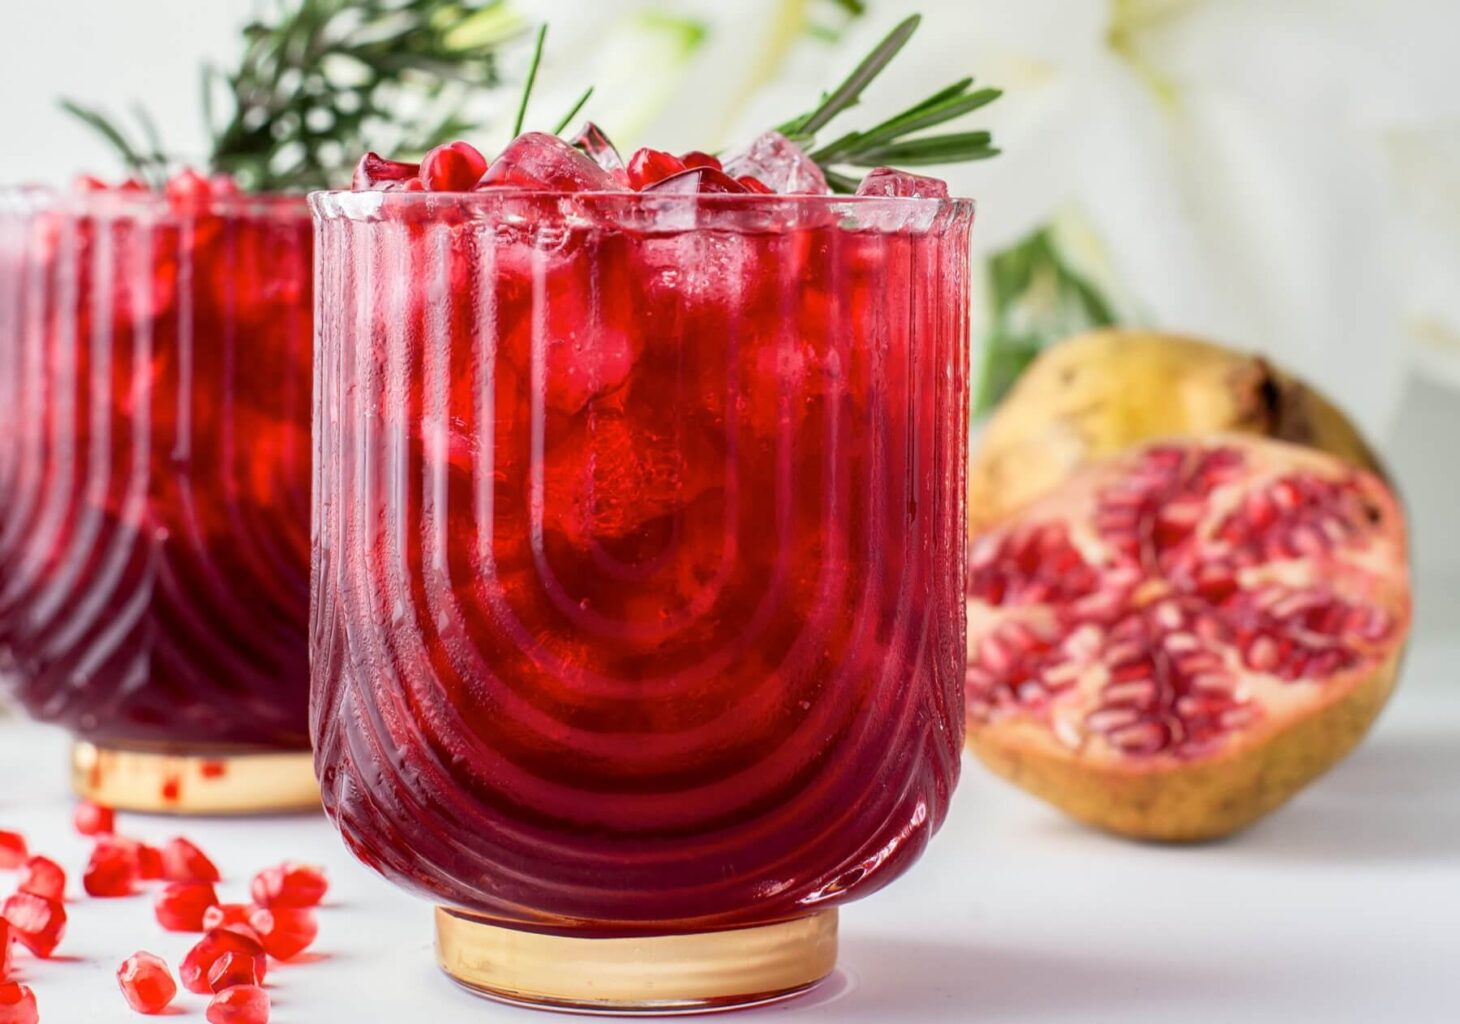 Two stunning ruby red cocktails in rocks glasses garnished with pomegranate arils and a sprig of rosemary.